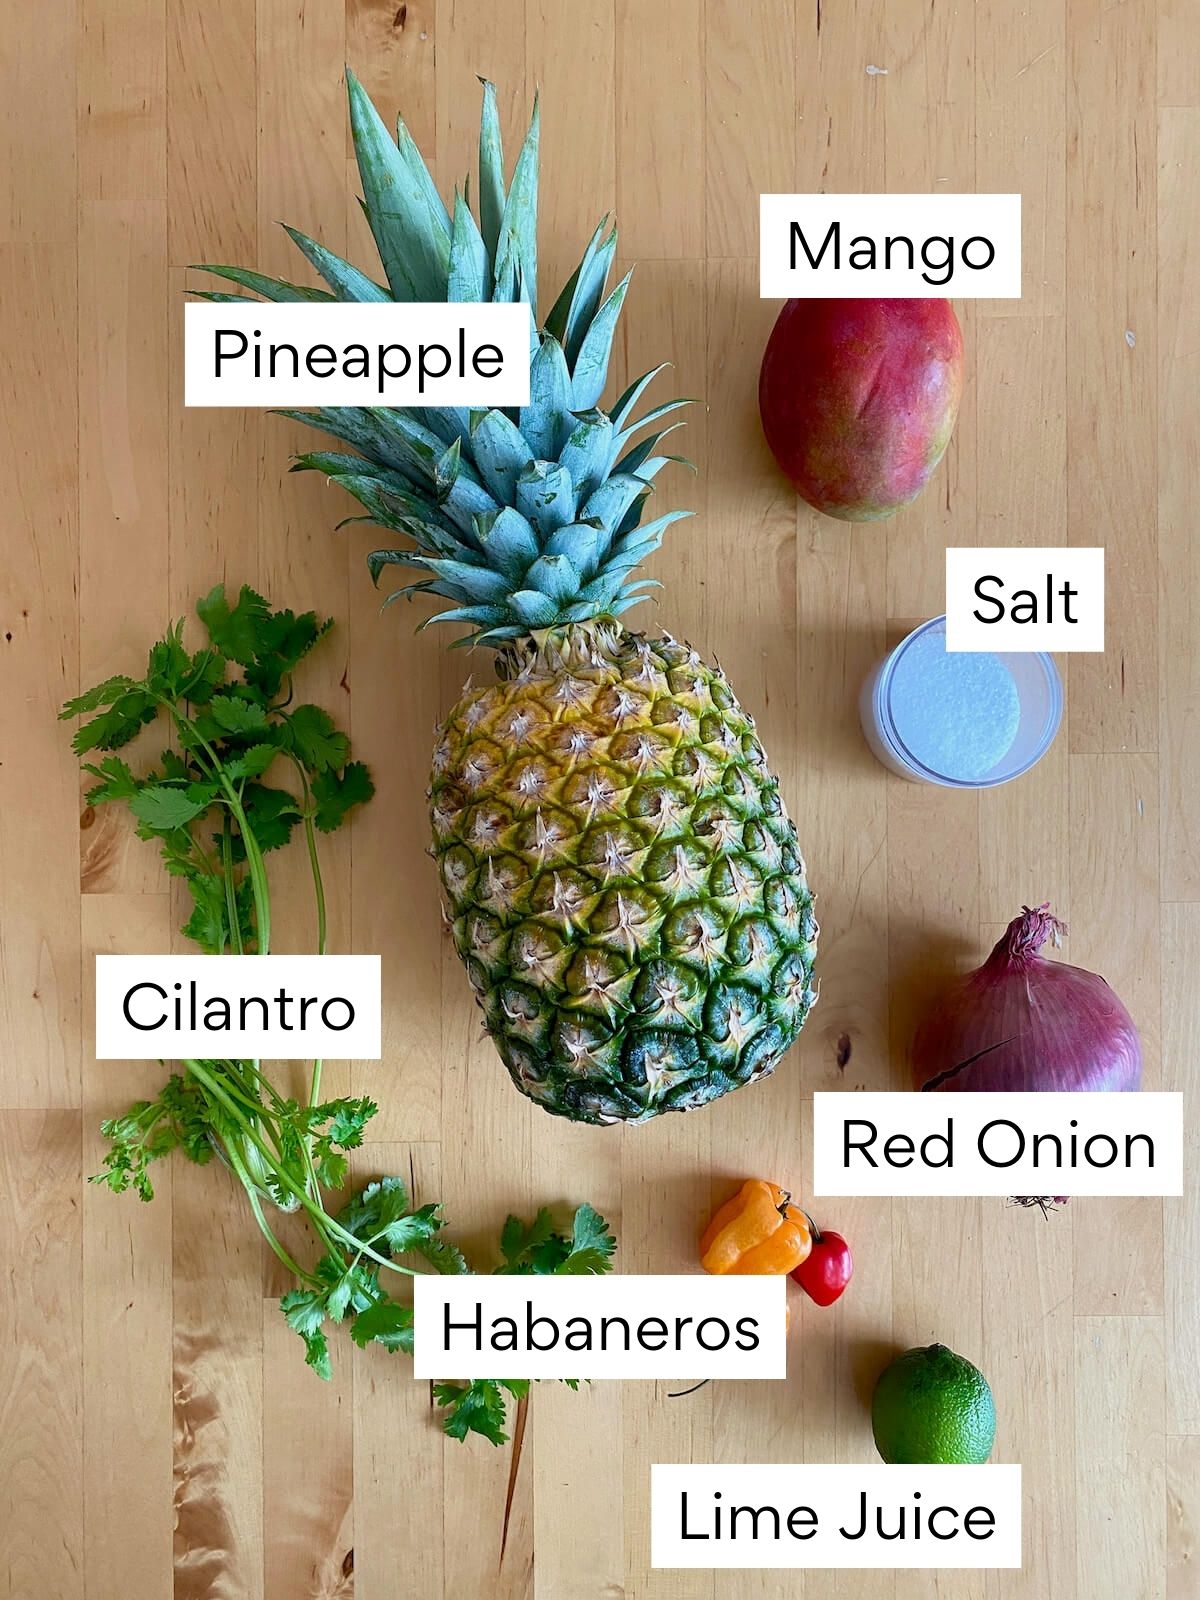 The ingredients to make pineapple mango habanero salsa. Each ingredient is labeled with black text on a white background.